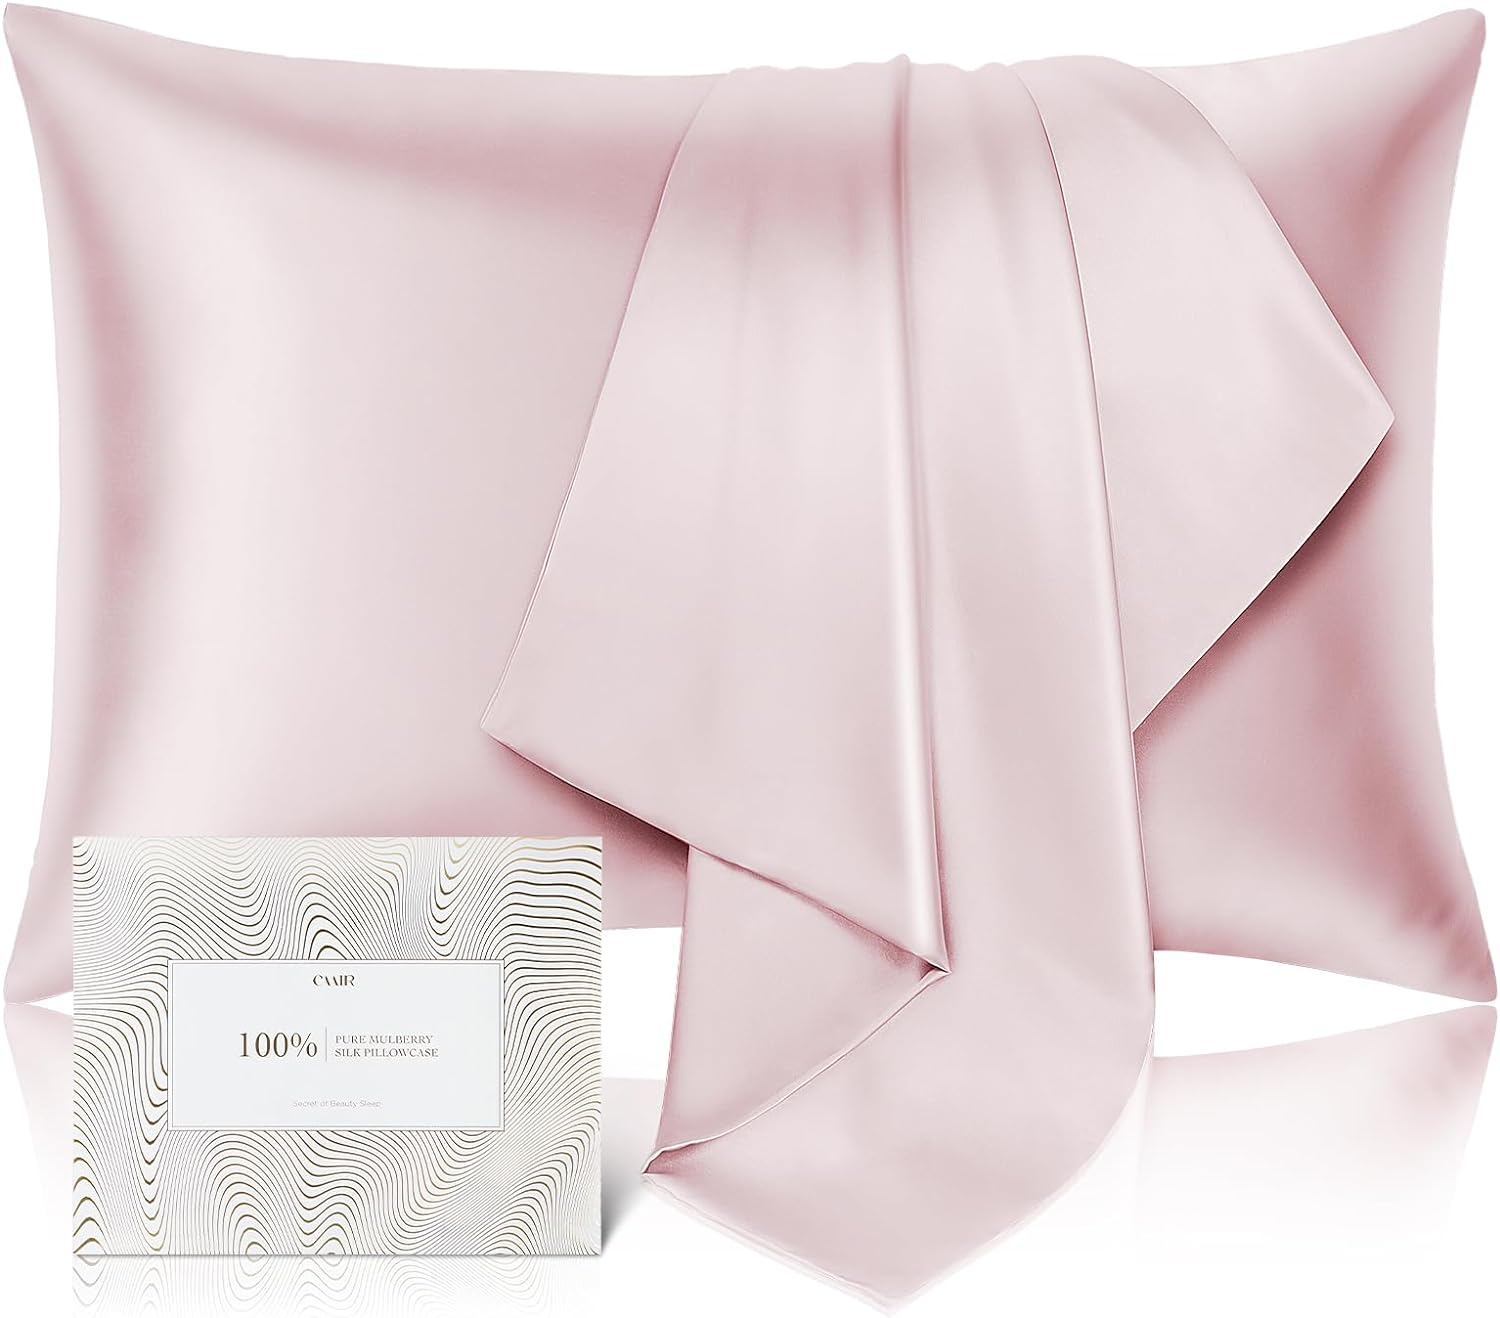 Mulberry Silk Pillowcase for Hair and Skin